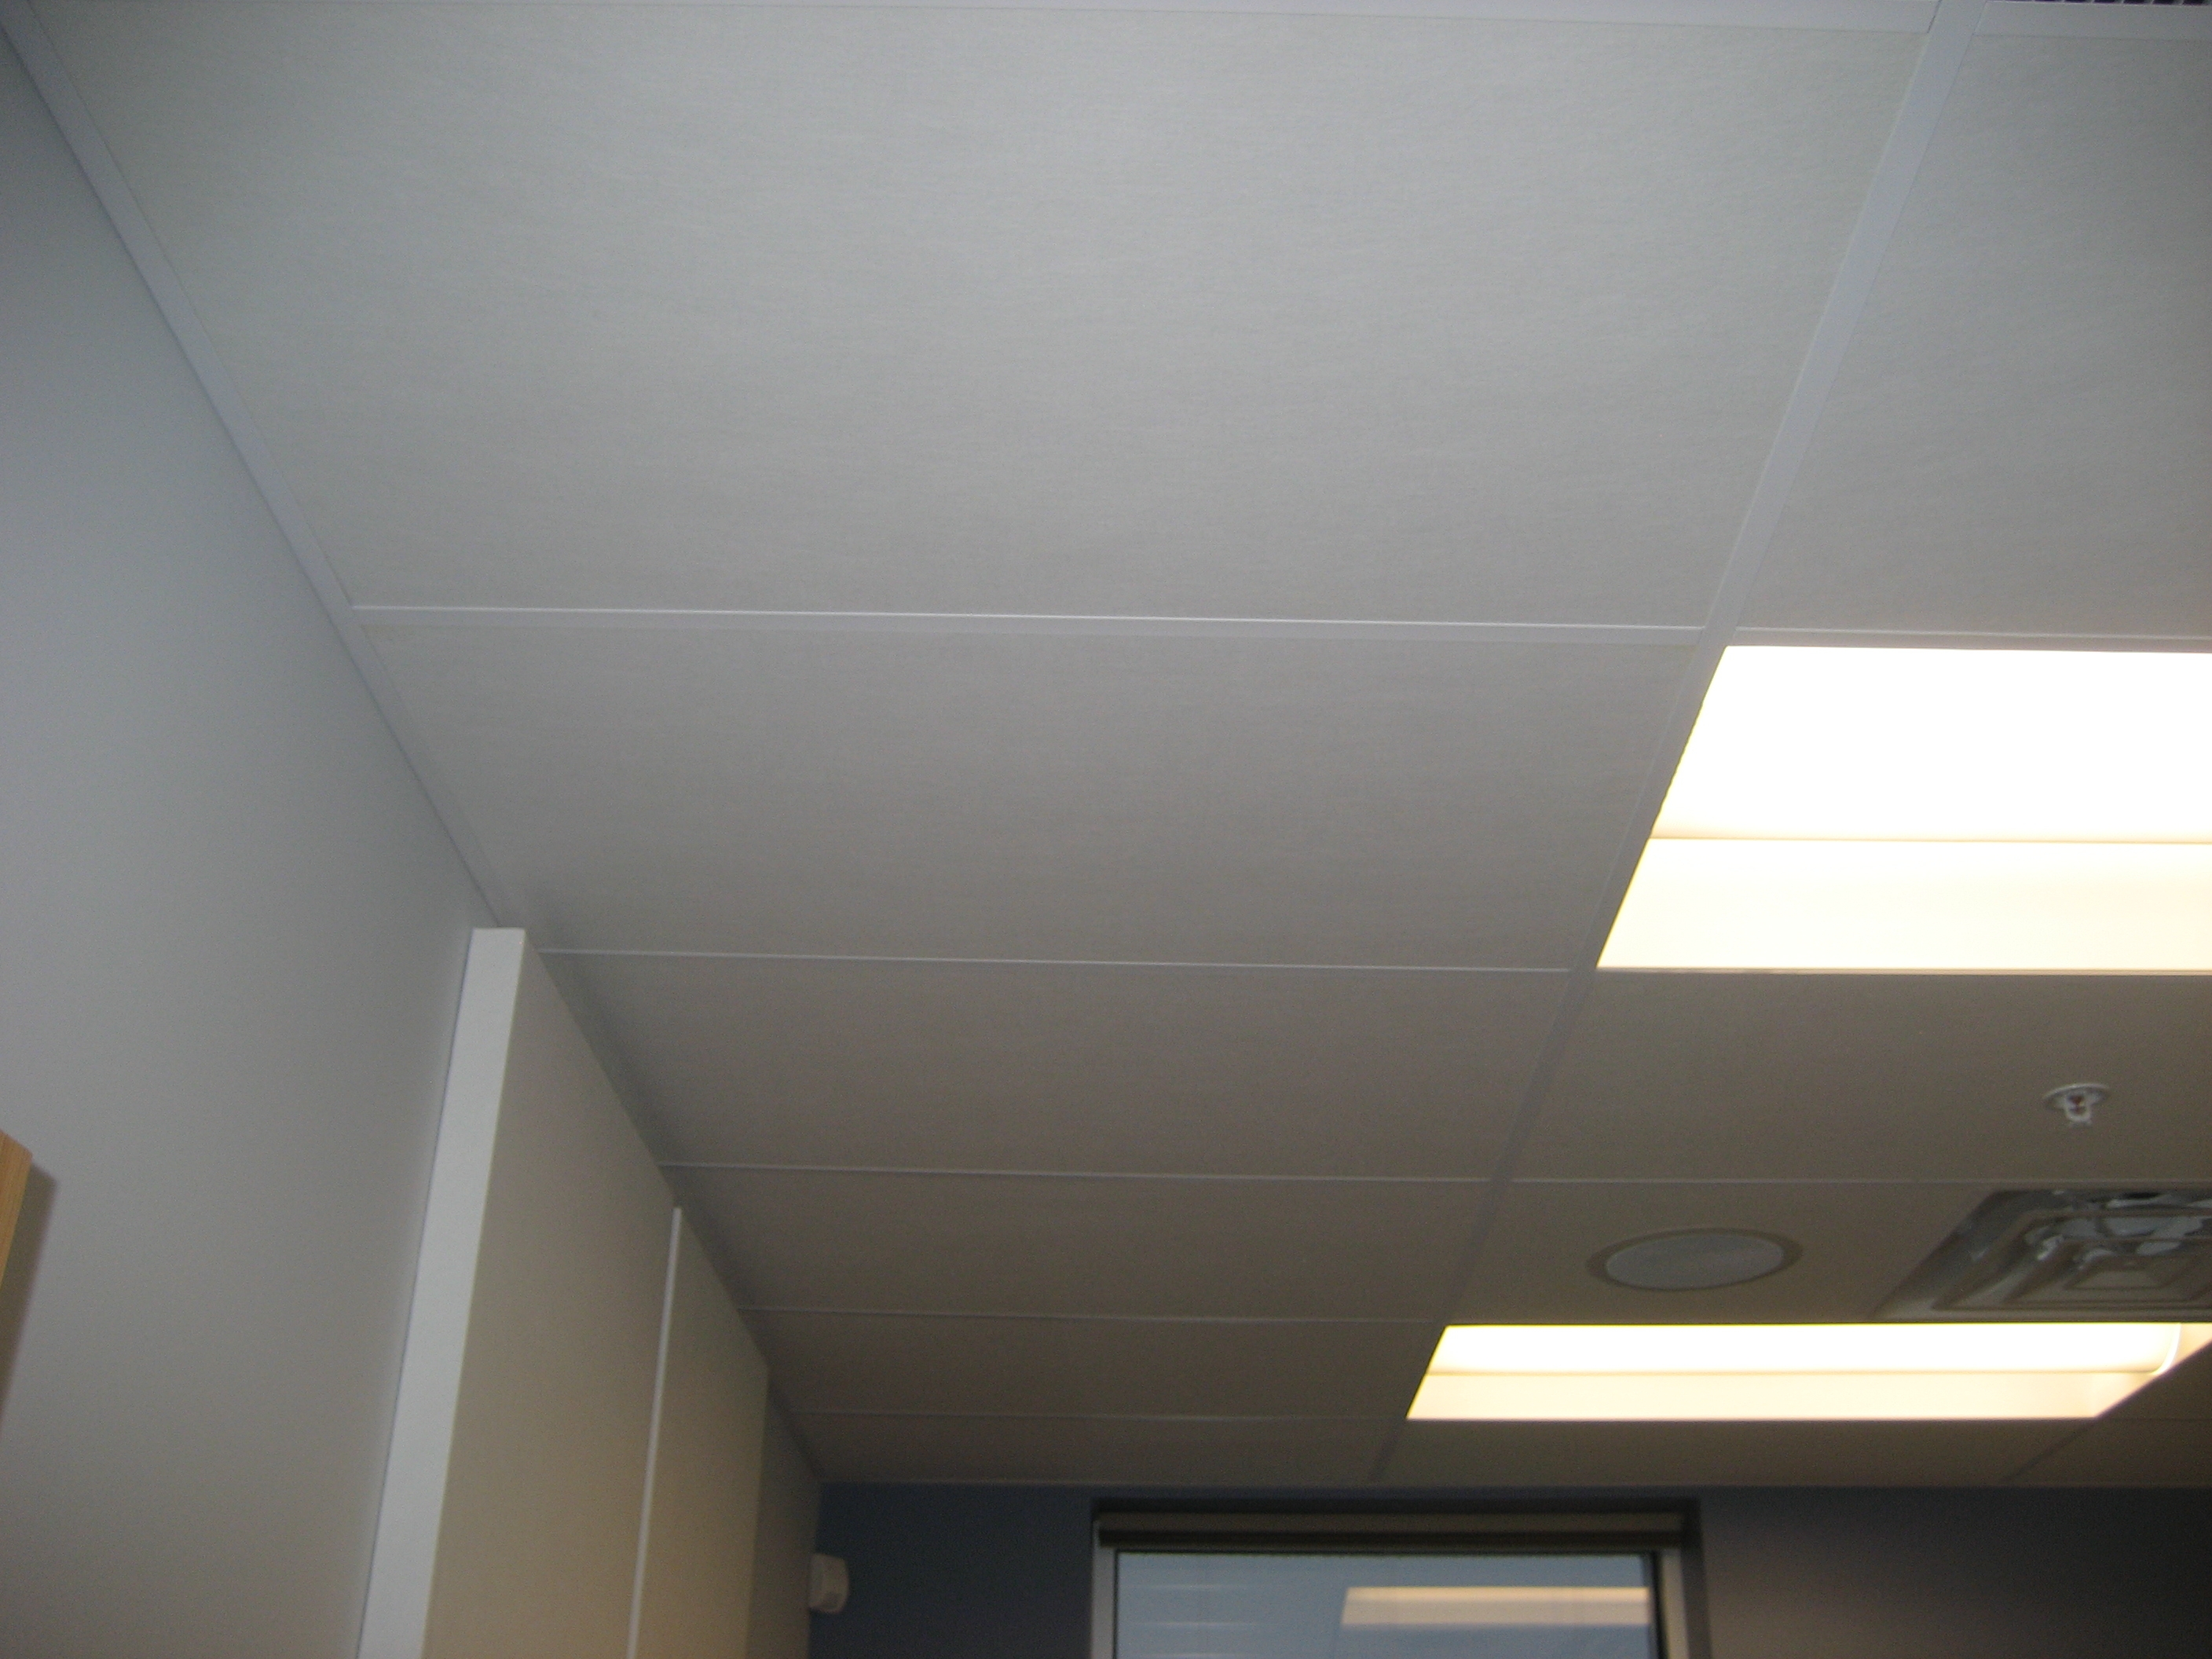 Fabric Faced Ceiling Tiles6000gw 1060 n ceiling tiles mbi products